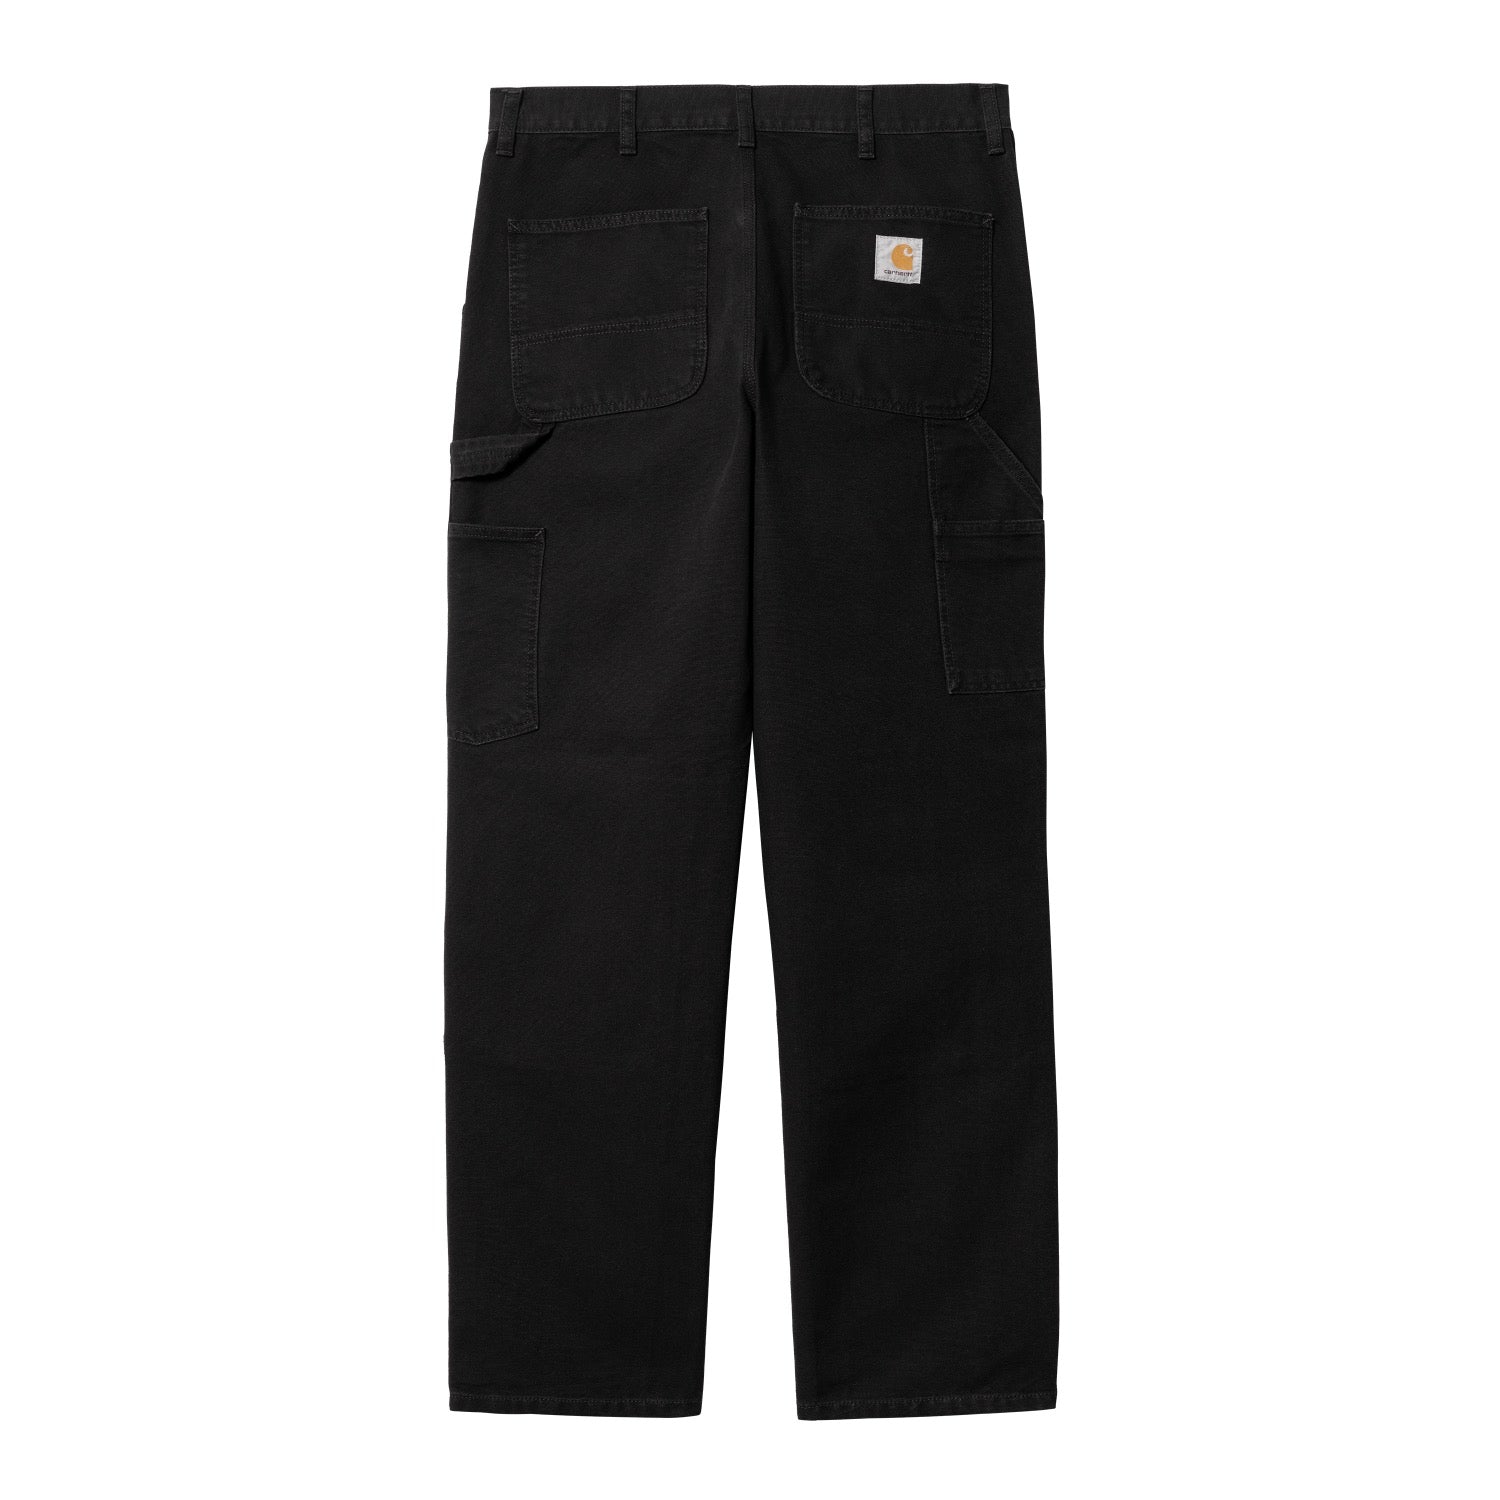 DOUBLE KNEE PANT - Black (aged canvas)